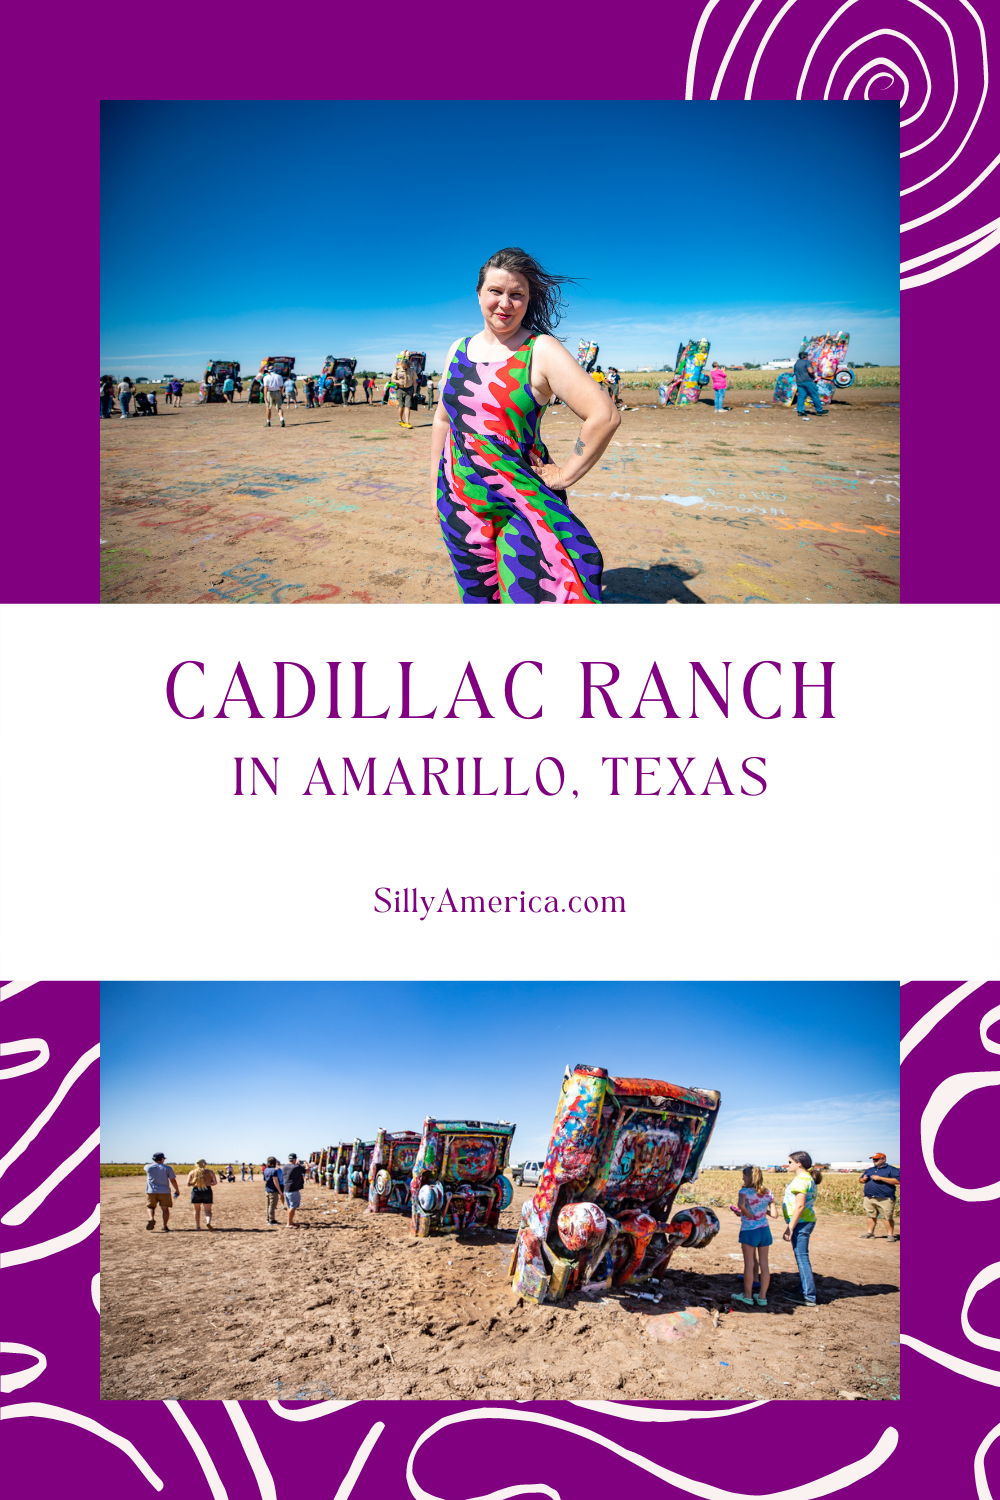 You won’t find these Cadillacs cruising down the street but you will find them on one of the most famous streets in America. It's one of the most recognizable Texas roadside attractions on Route 66: Cadillac Ranch in Amarillo, Texas. #Route66 #Route66RoadTrip  #TexasRoadsideAttractions #TexasRoadsideAttraction #RoadsideAttractions #RoadsideAttraction #RoadTrip #TexasRoadTrip  #TexasRoadTripBucketLists #TexasBucketList #TexasRoadTripIdeas #TexasRoadTripWithKids #TexasRoadTripItinerary 